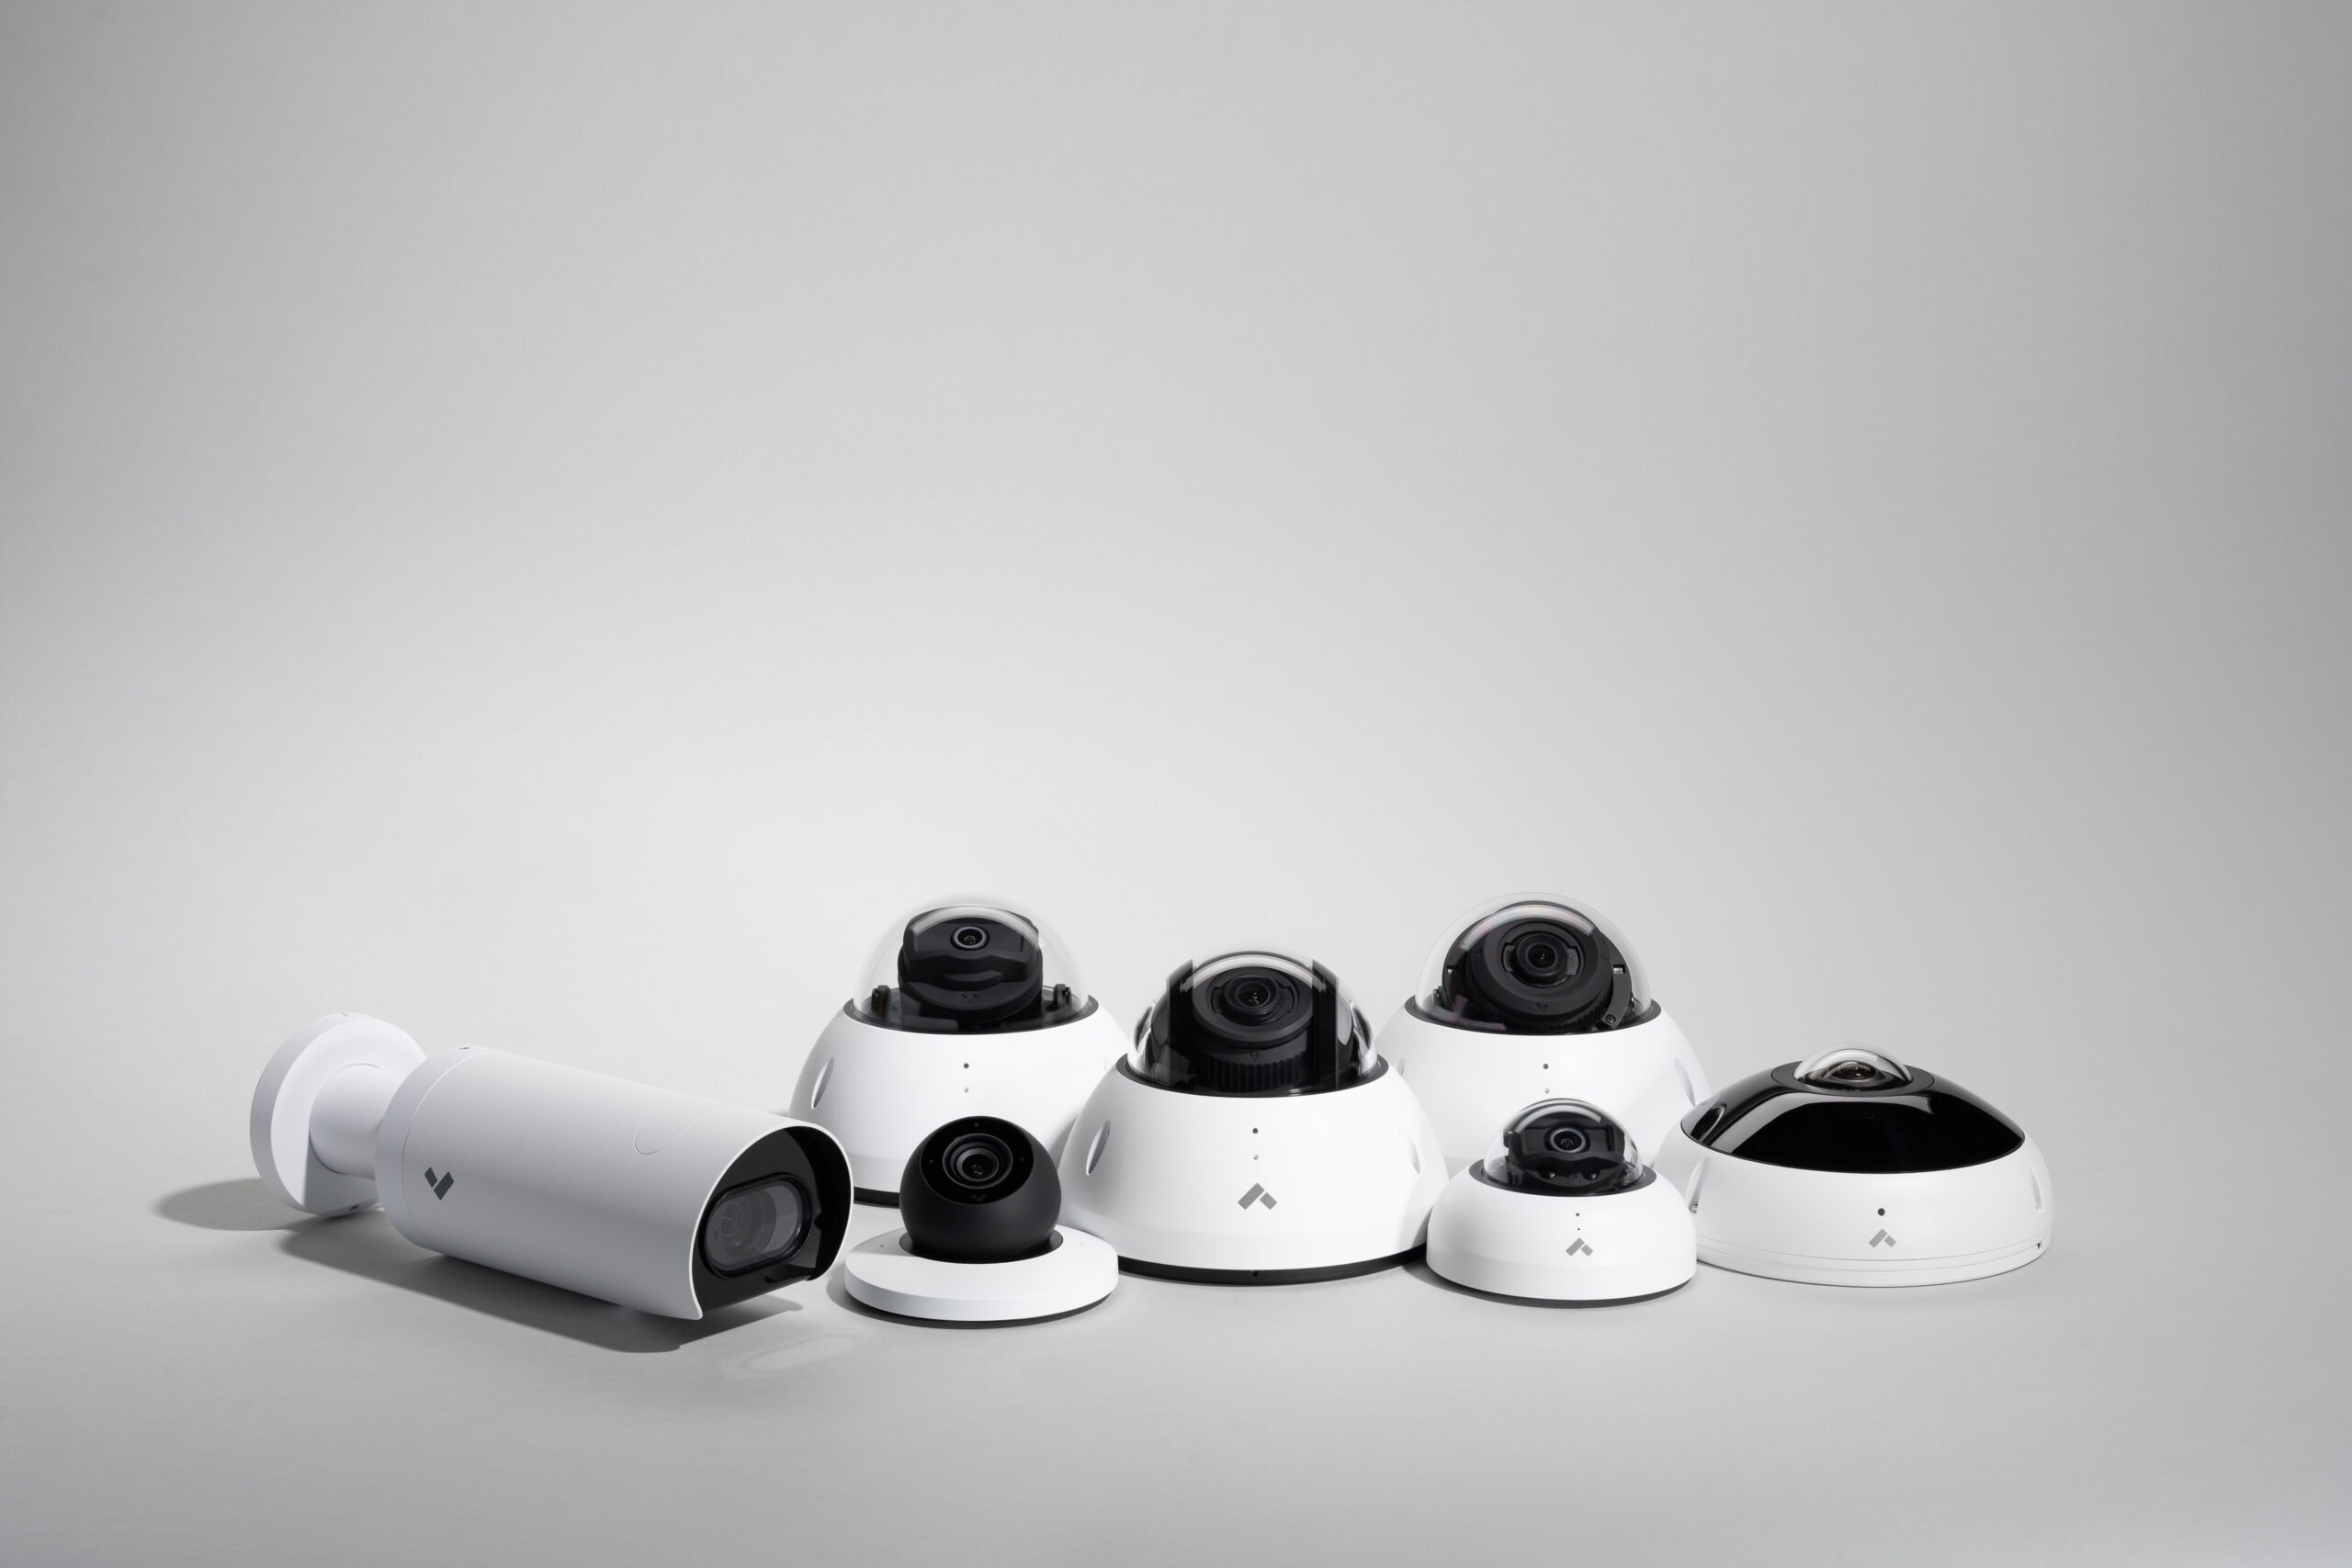 Verkada security cameras with license plate recognition and video analytics